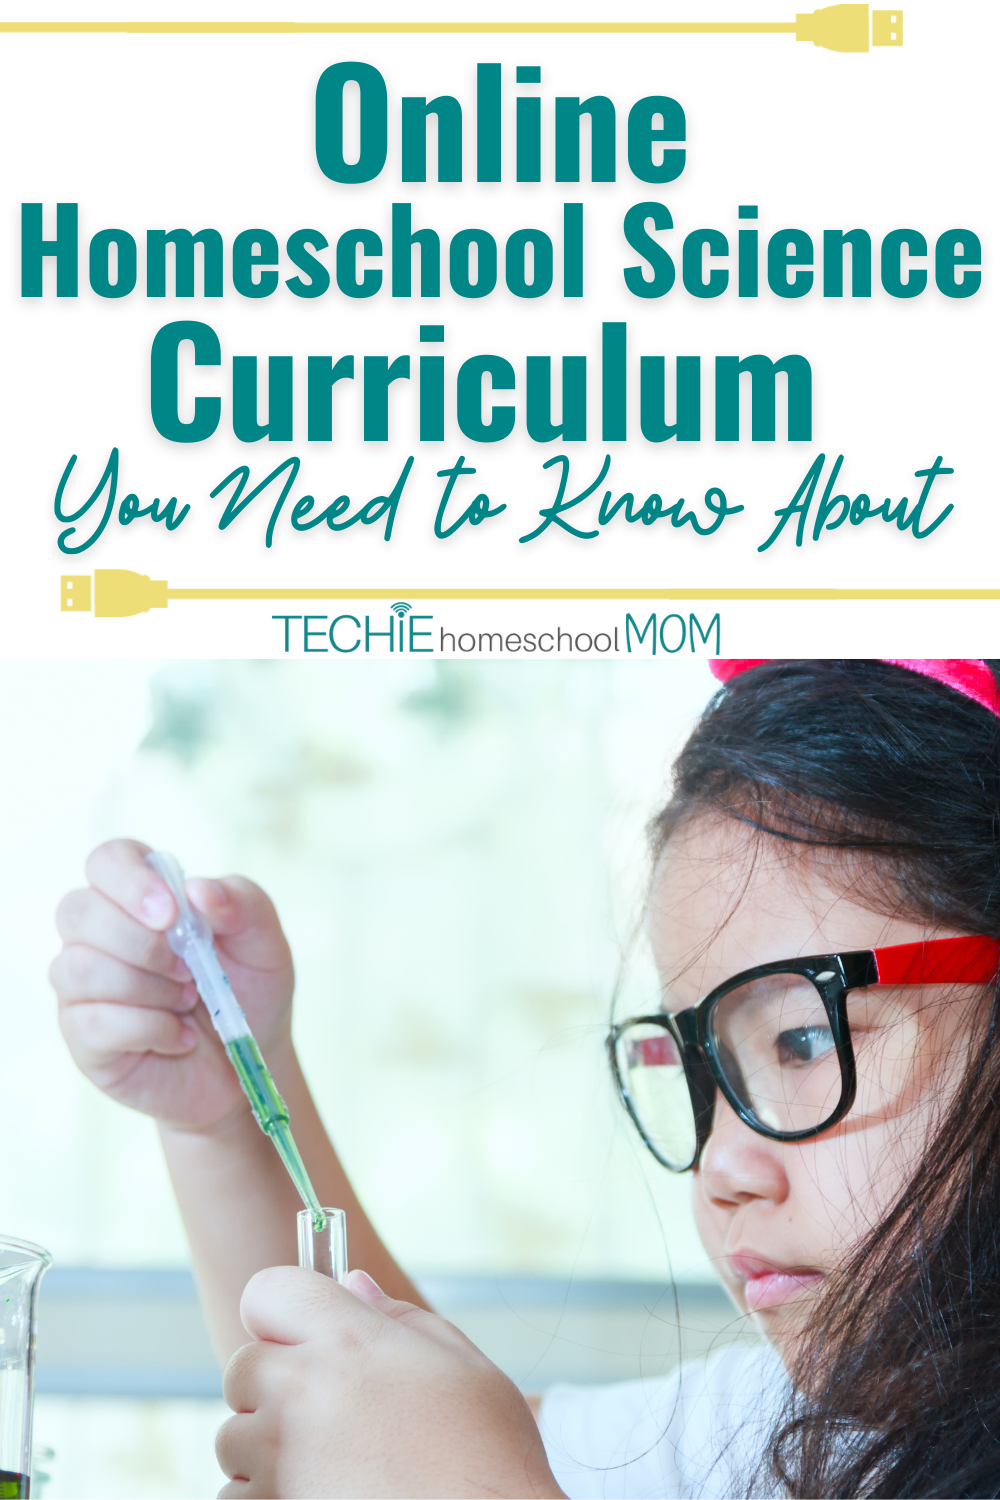 What are the best online options for homeschool science curriculum? These are popular choices recommended by other homeschool moms.